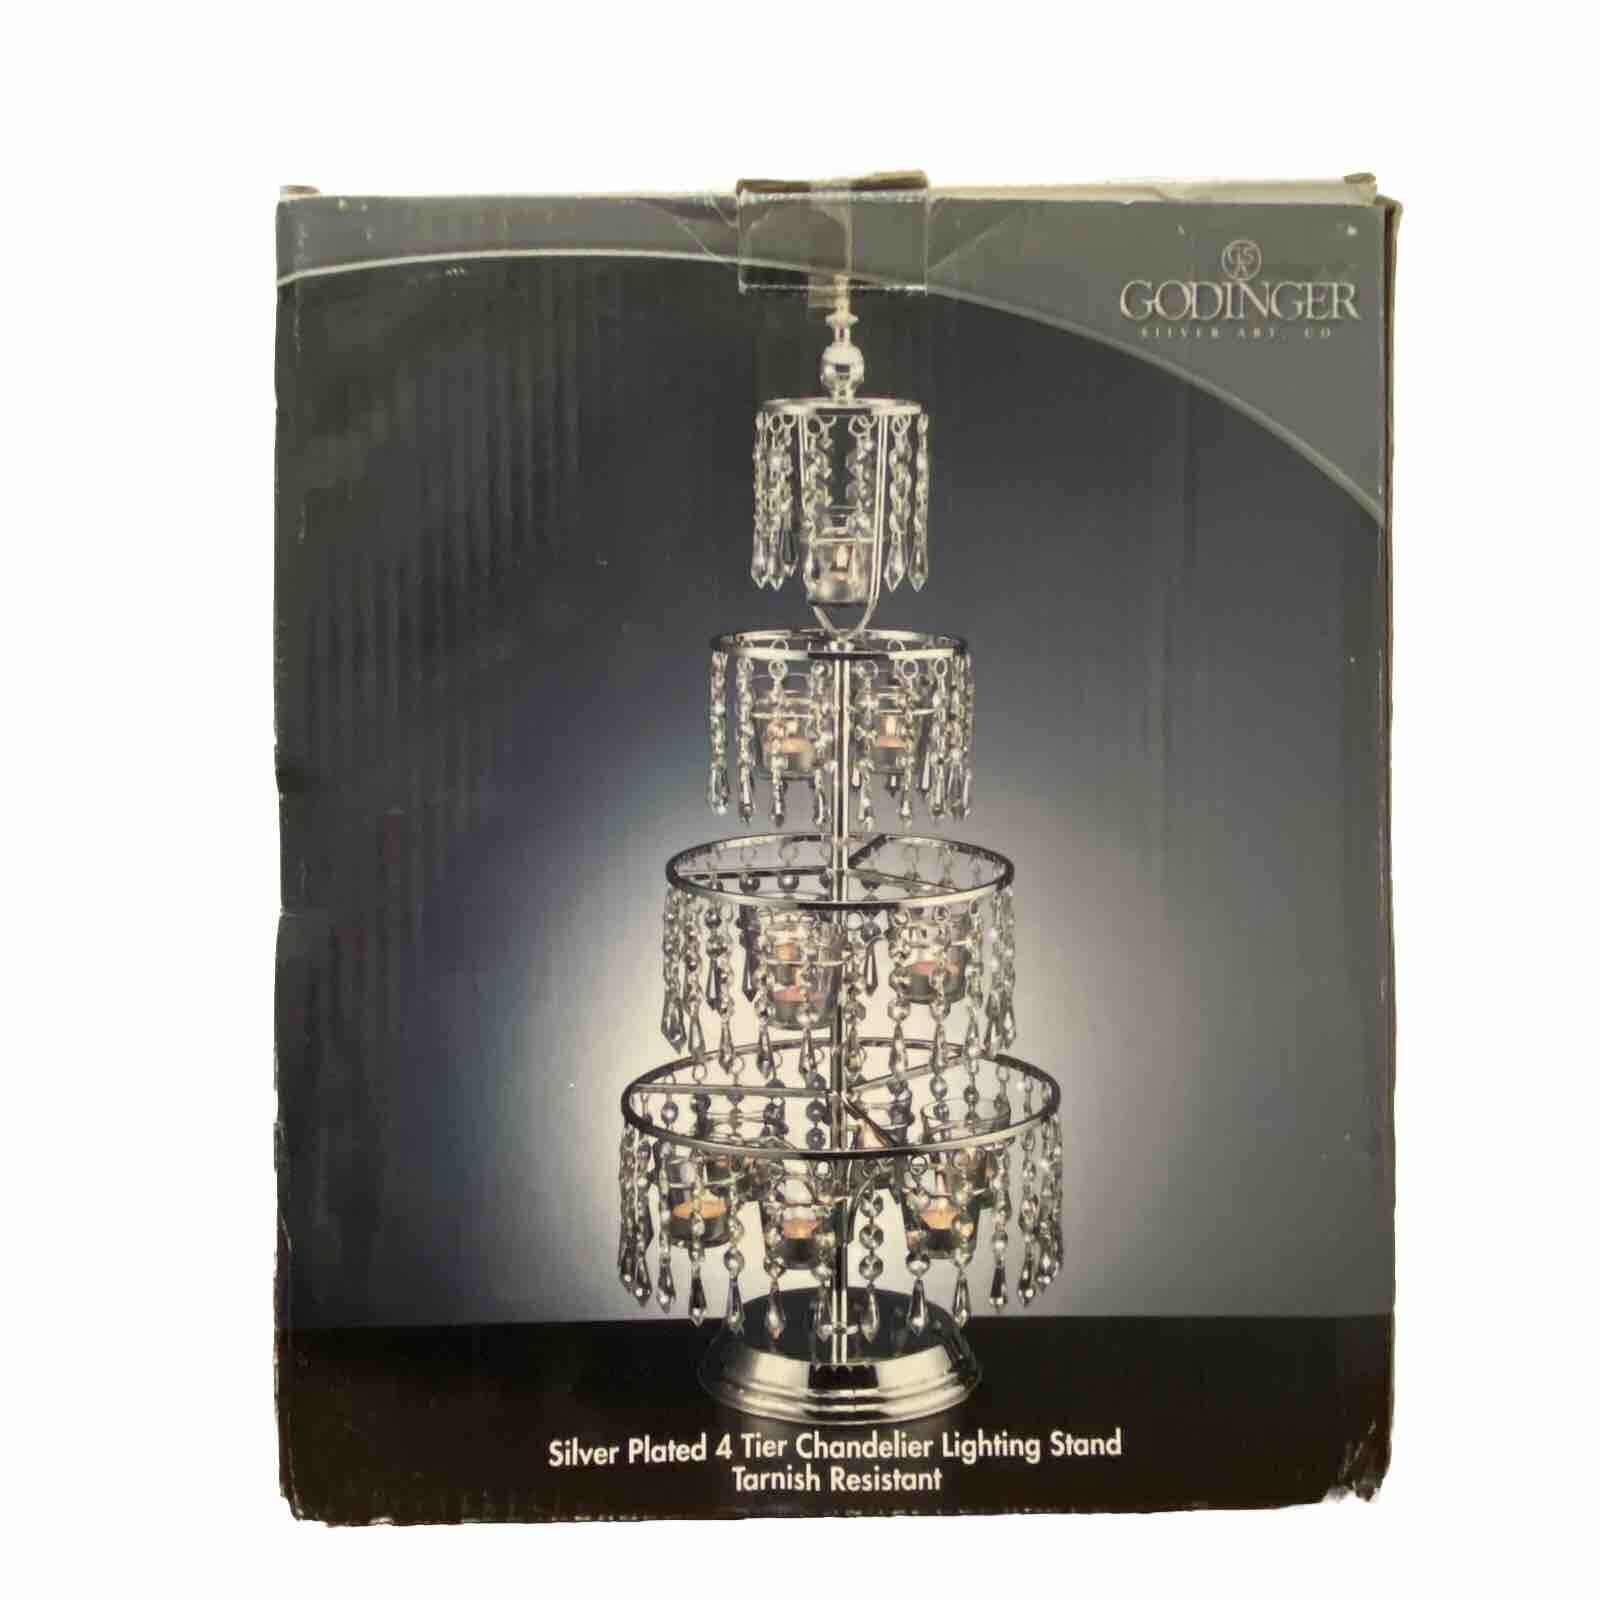 Rare GODINGER Silver Plated 4-Tier Chandelier Light Stand Tealight Candle Holder